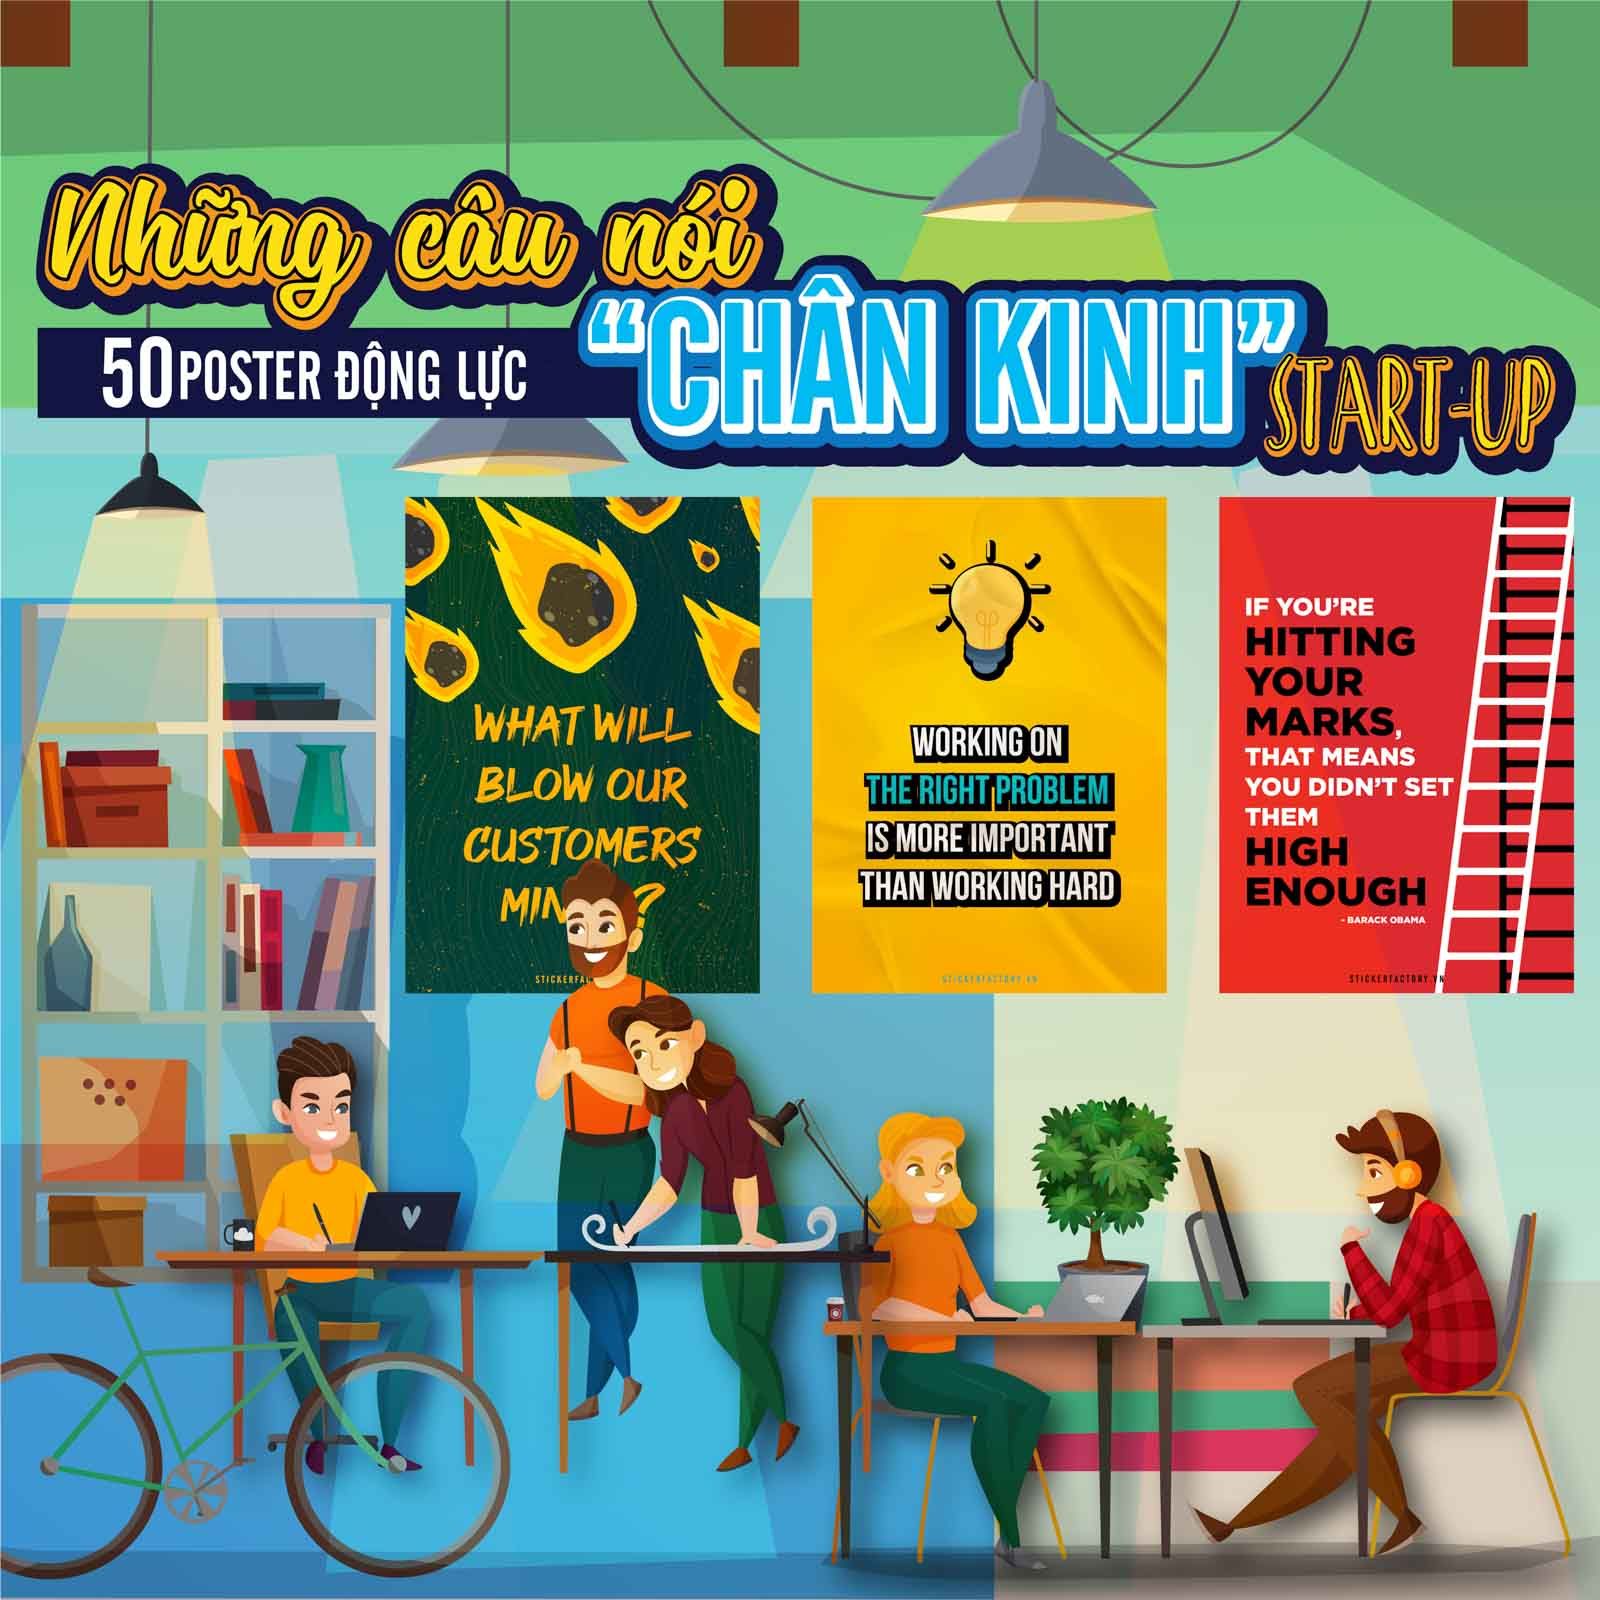 Focus on things that are the highest value and do them perfectly - Poster động lực Chân Kinh Startup